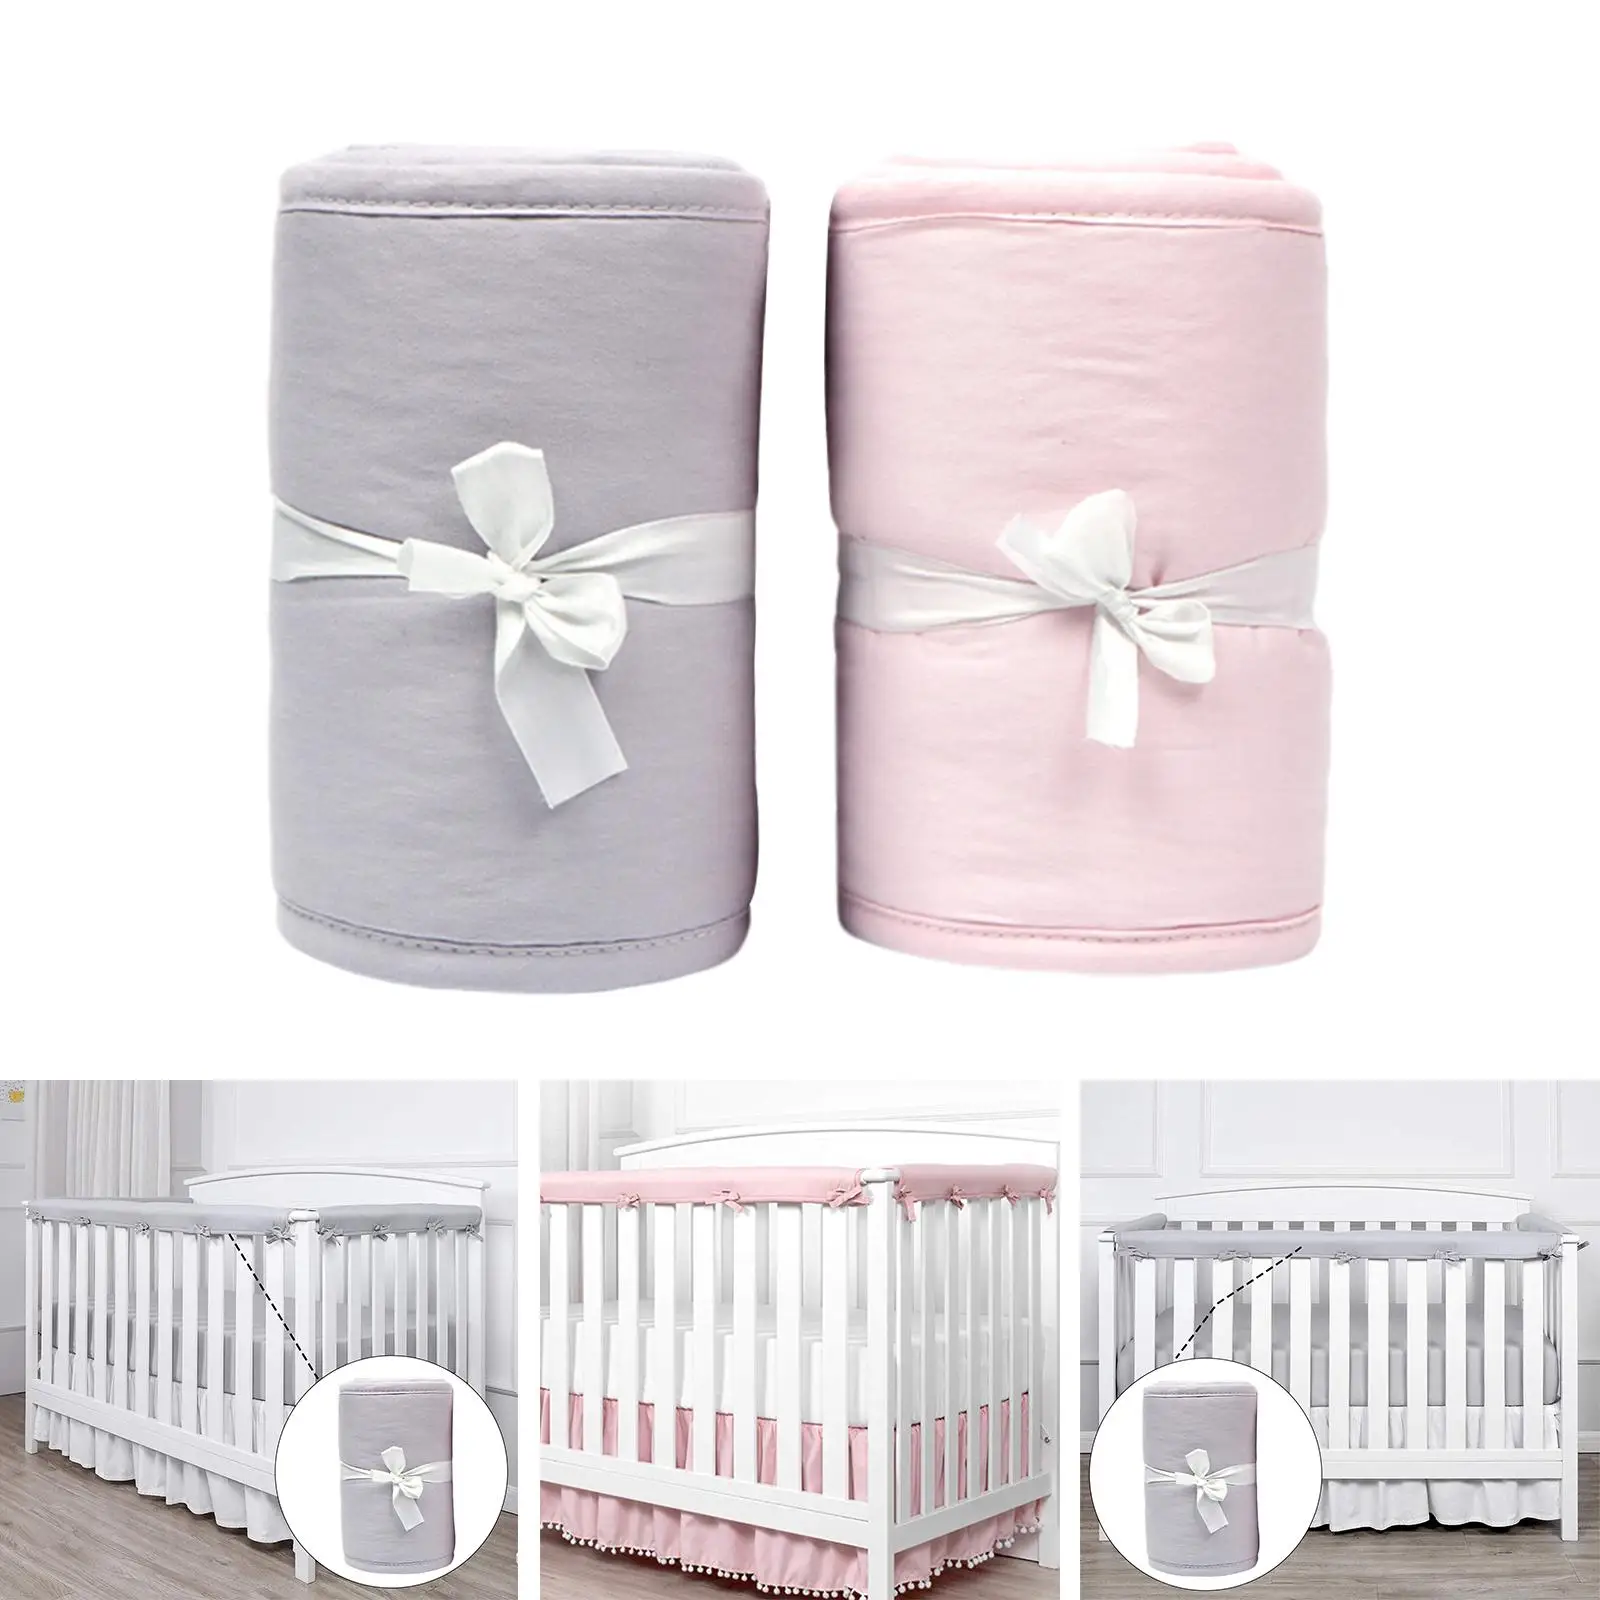 3 Pieces Baby Crib Rail Cover Baby Safety Products Cotton for Fence Infants